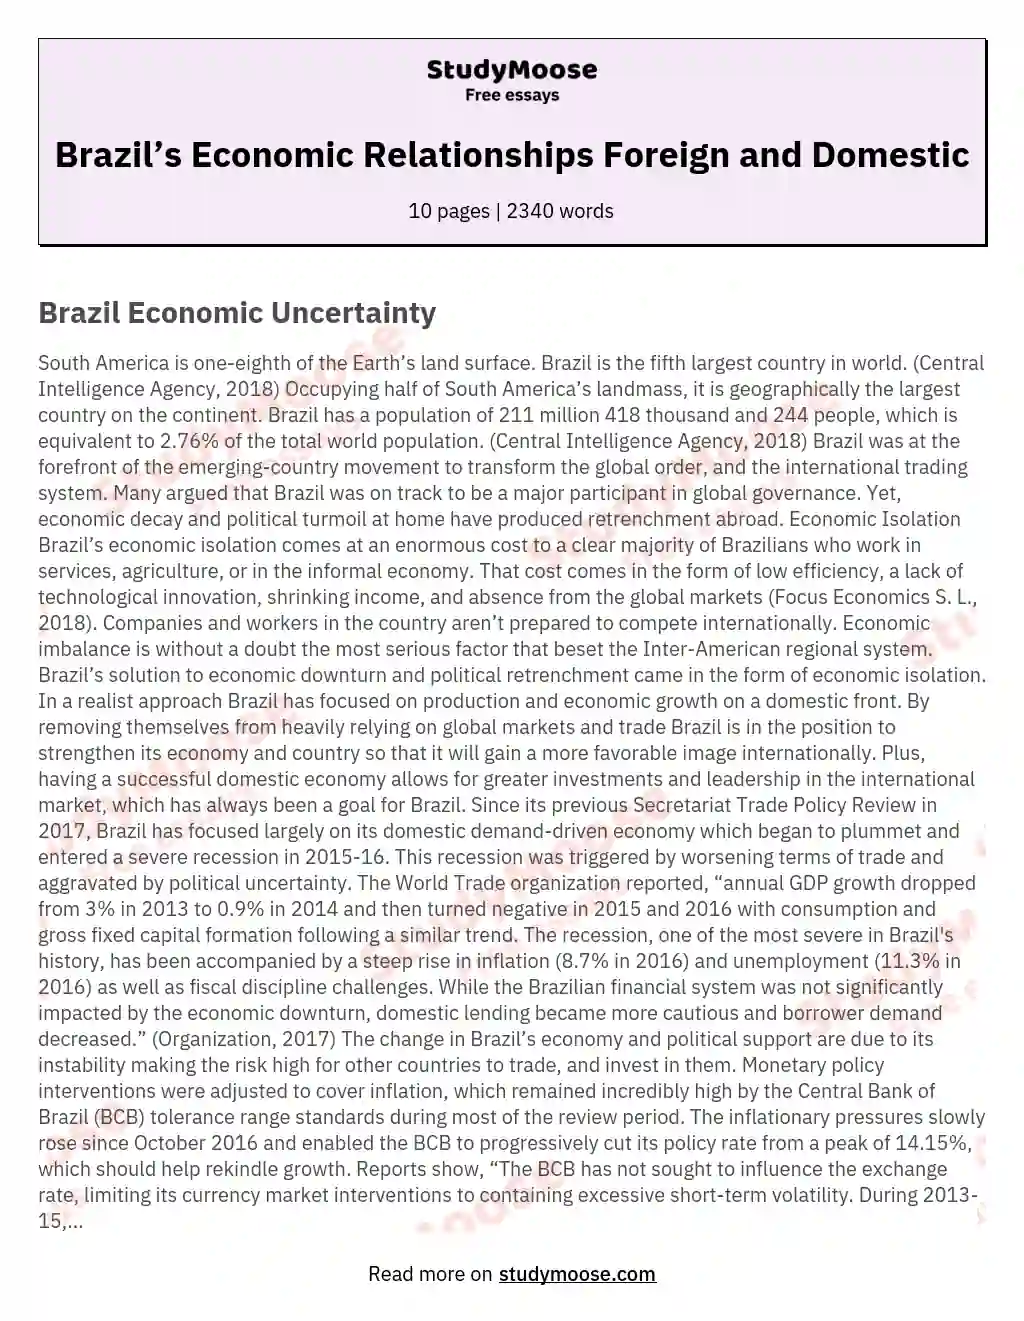 Brazil’s Economic Relationships Foreign and Domestic essay